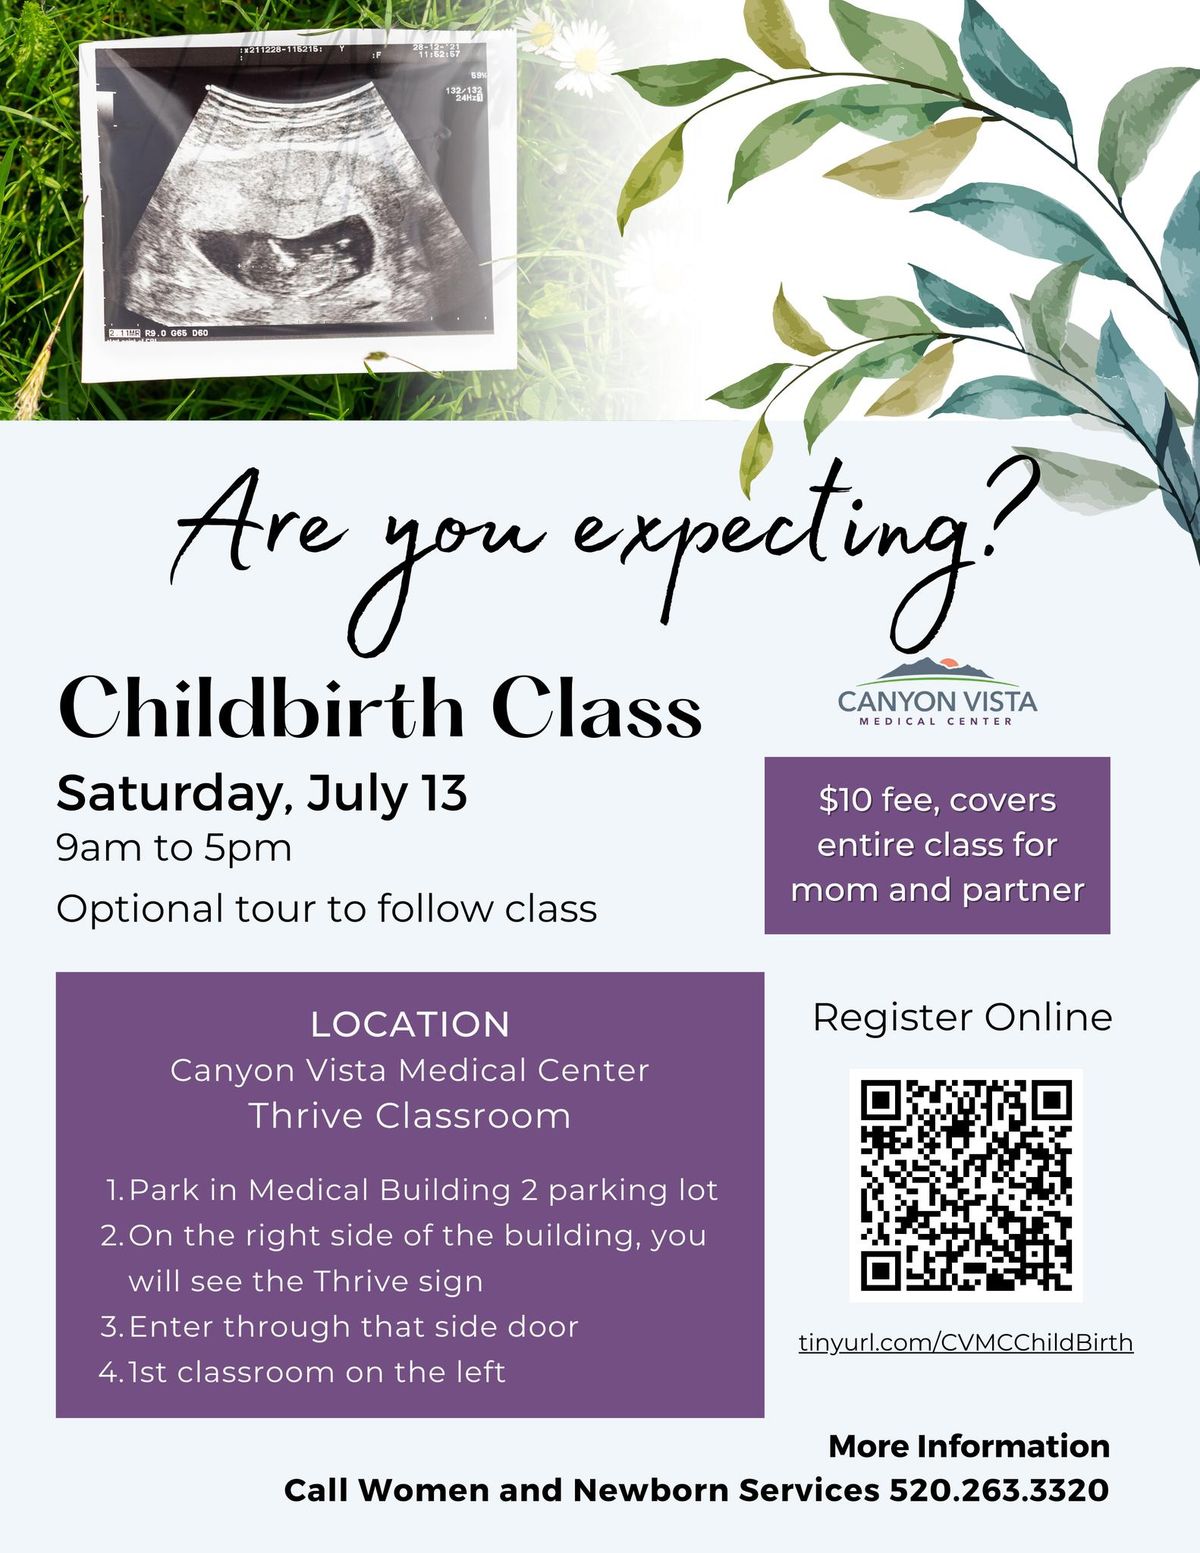 Are You Expecting? Childbirth Class